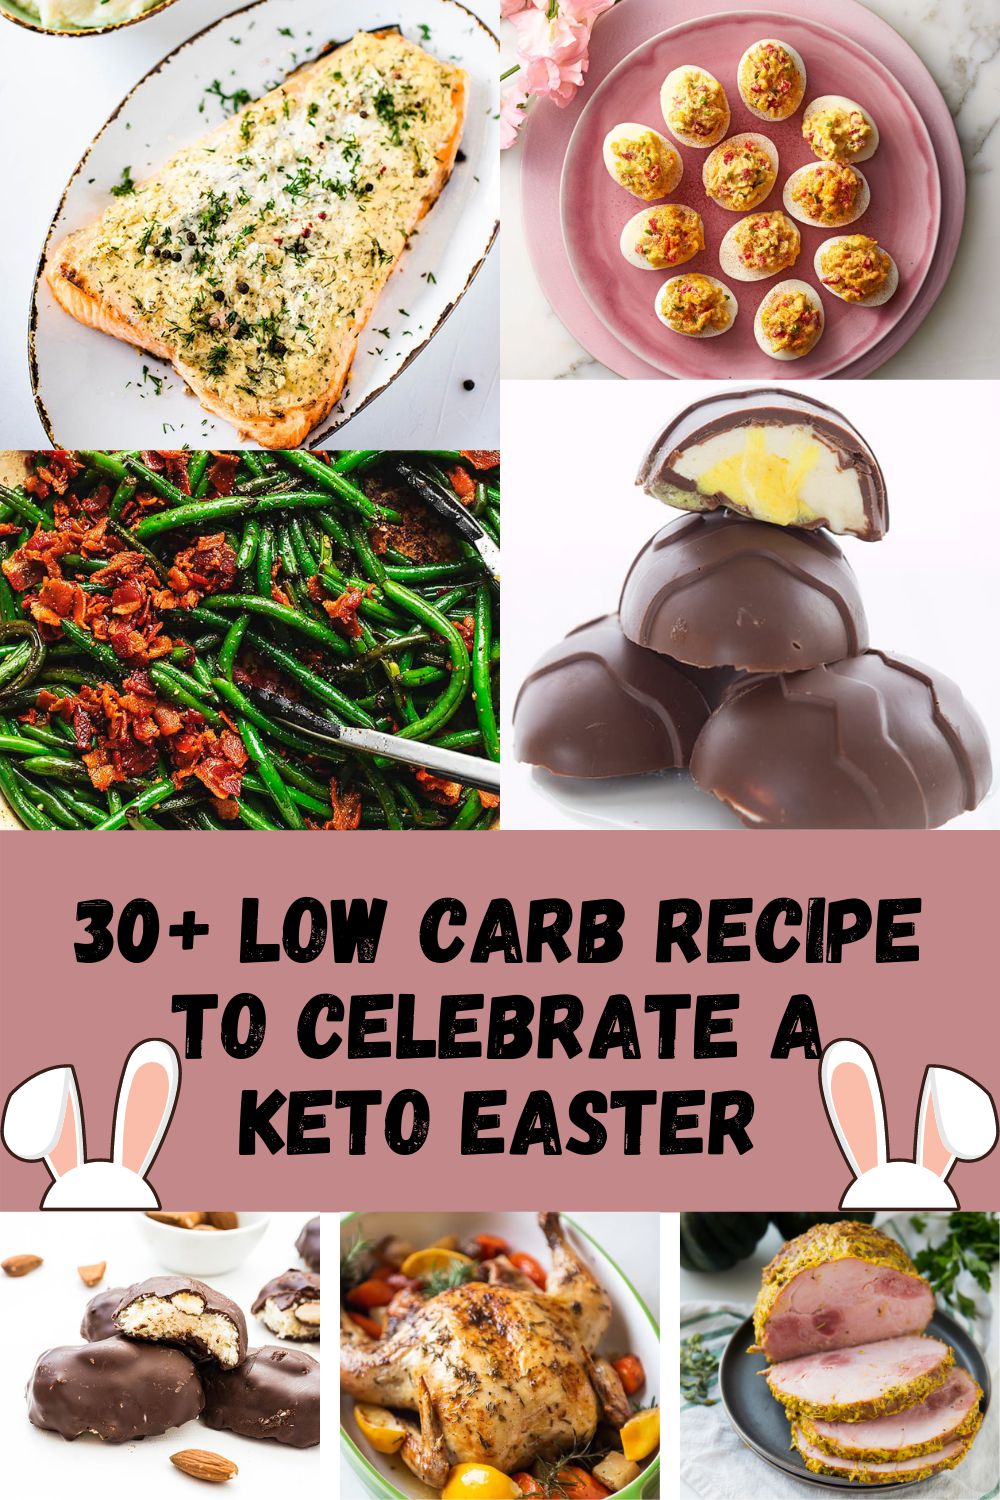 30 + Low Carb Recipe To Celebrate a Keto Easter